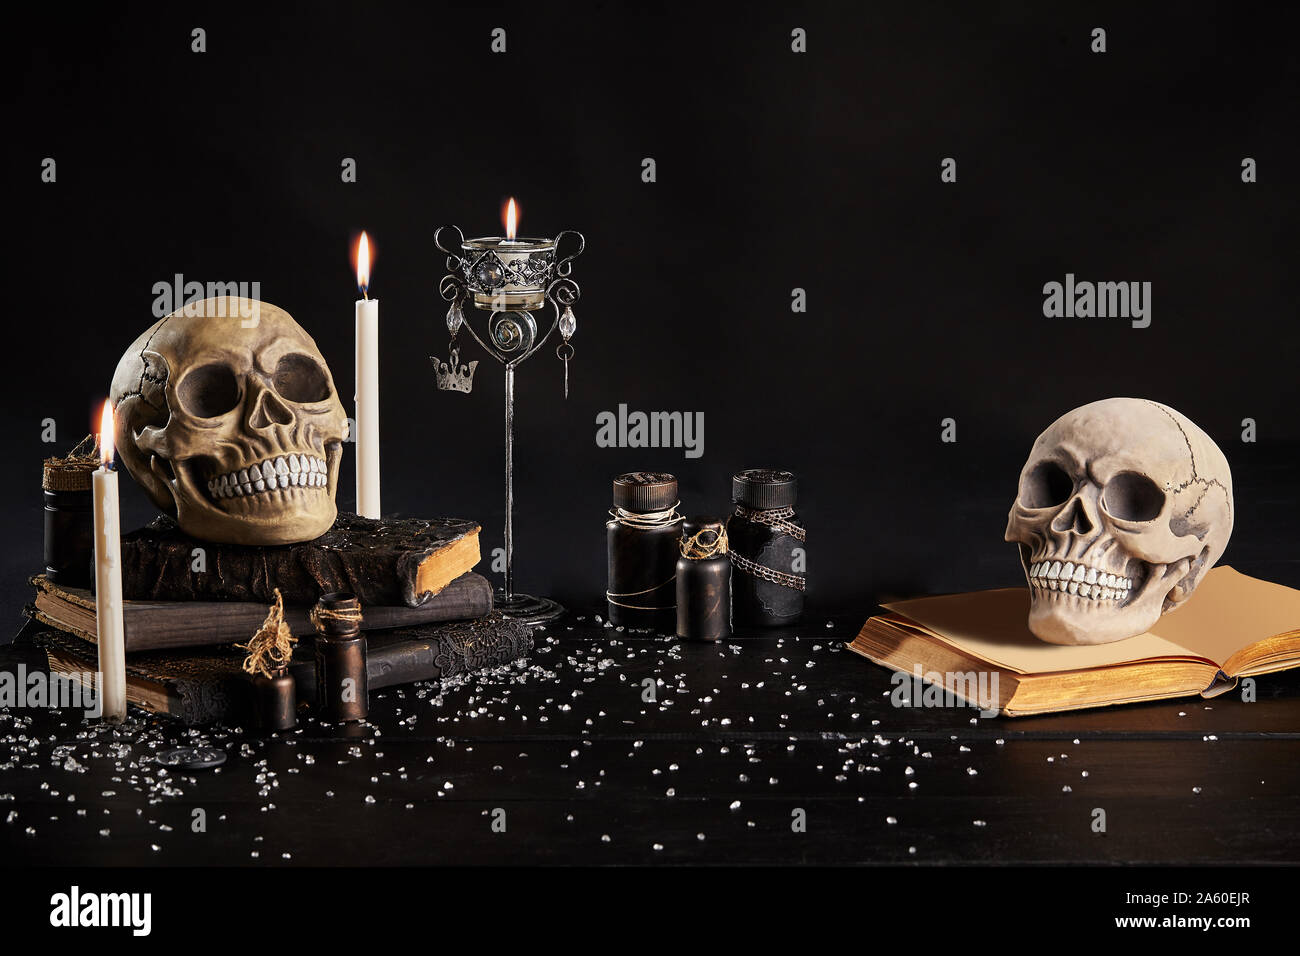 Realistic model of two human craniums with teeth are standing on an old books, jars, candlestick and burning candles are nearby on a wooden dark table Stock Photo